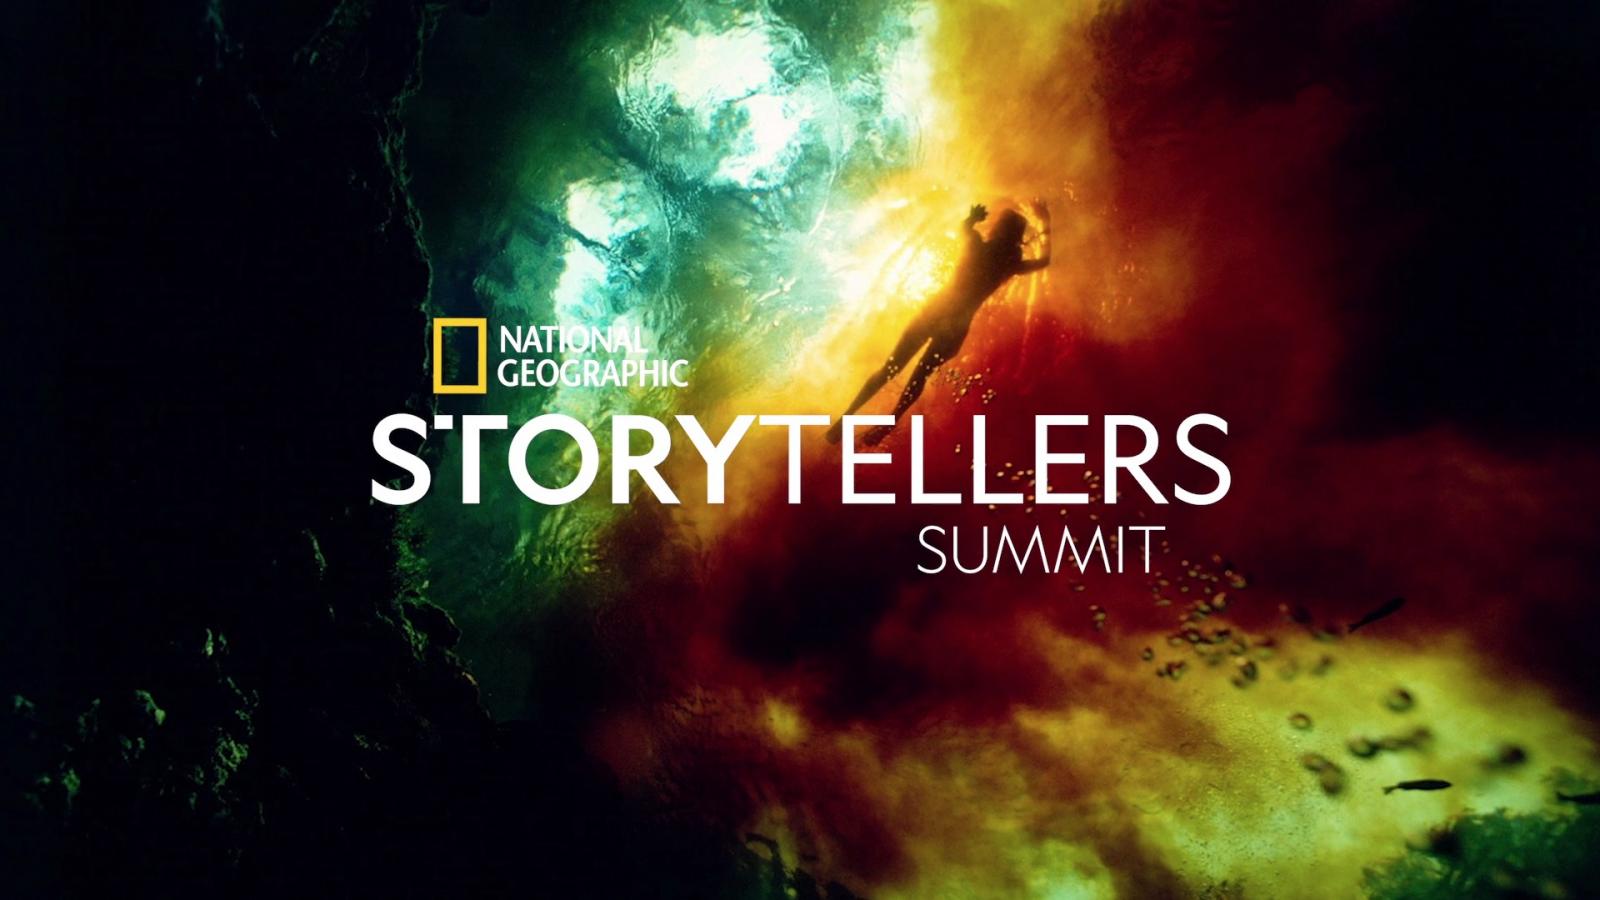 Thumbnail of National Geographic Storytellers Summit 2021